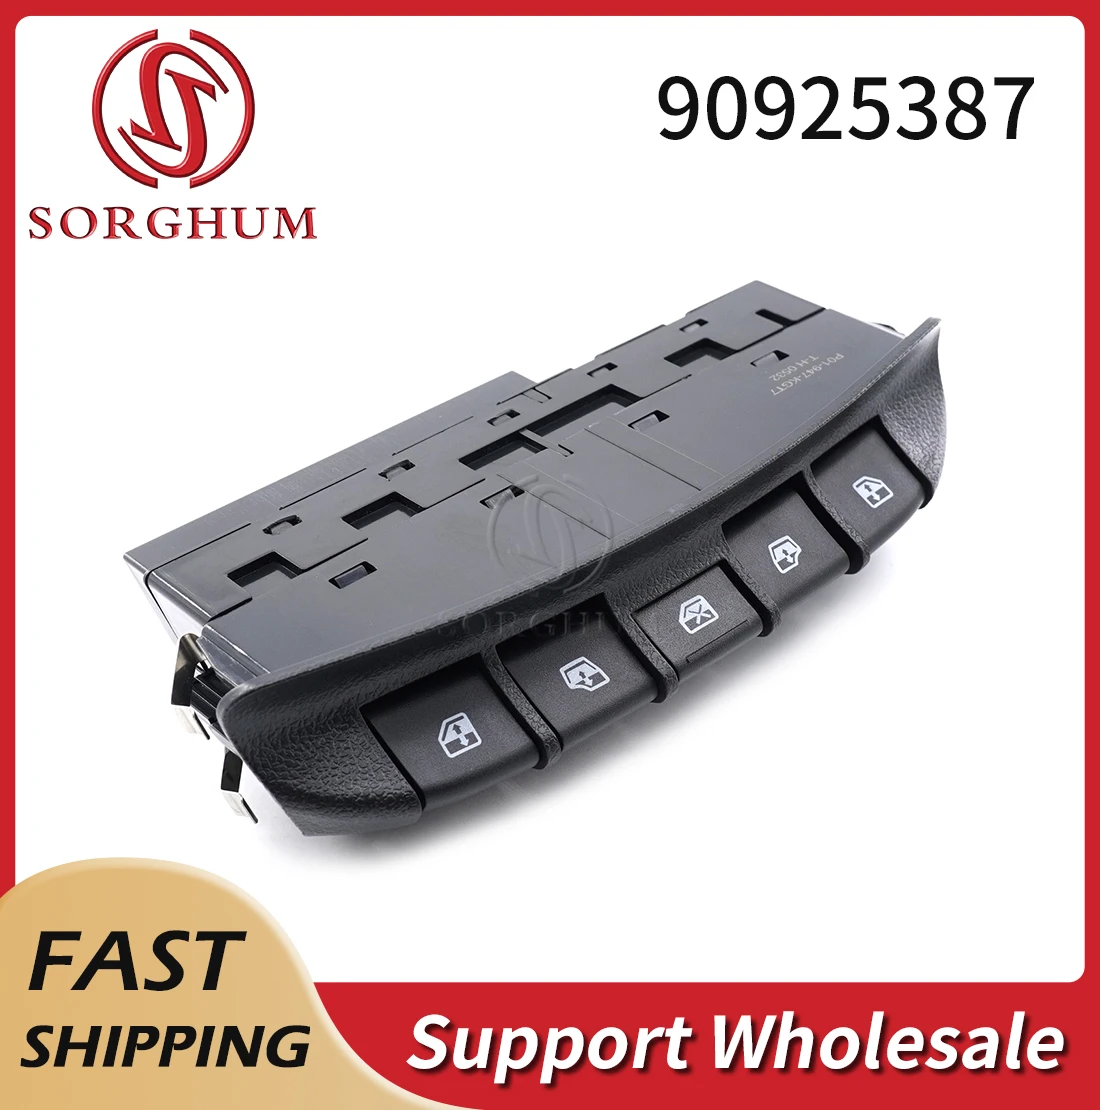 

Sorghum 90925387 Master Control Button Auto Window Switch For Buick For Cadillac For Chevrolet Sail 3 90925388 Car Accessories